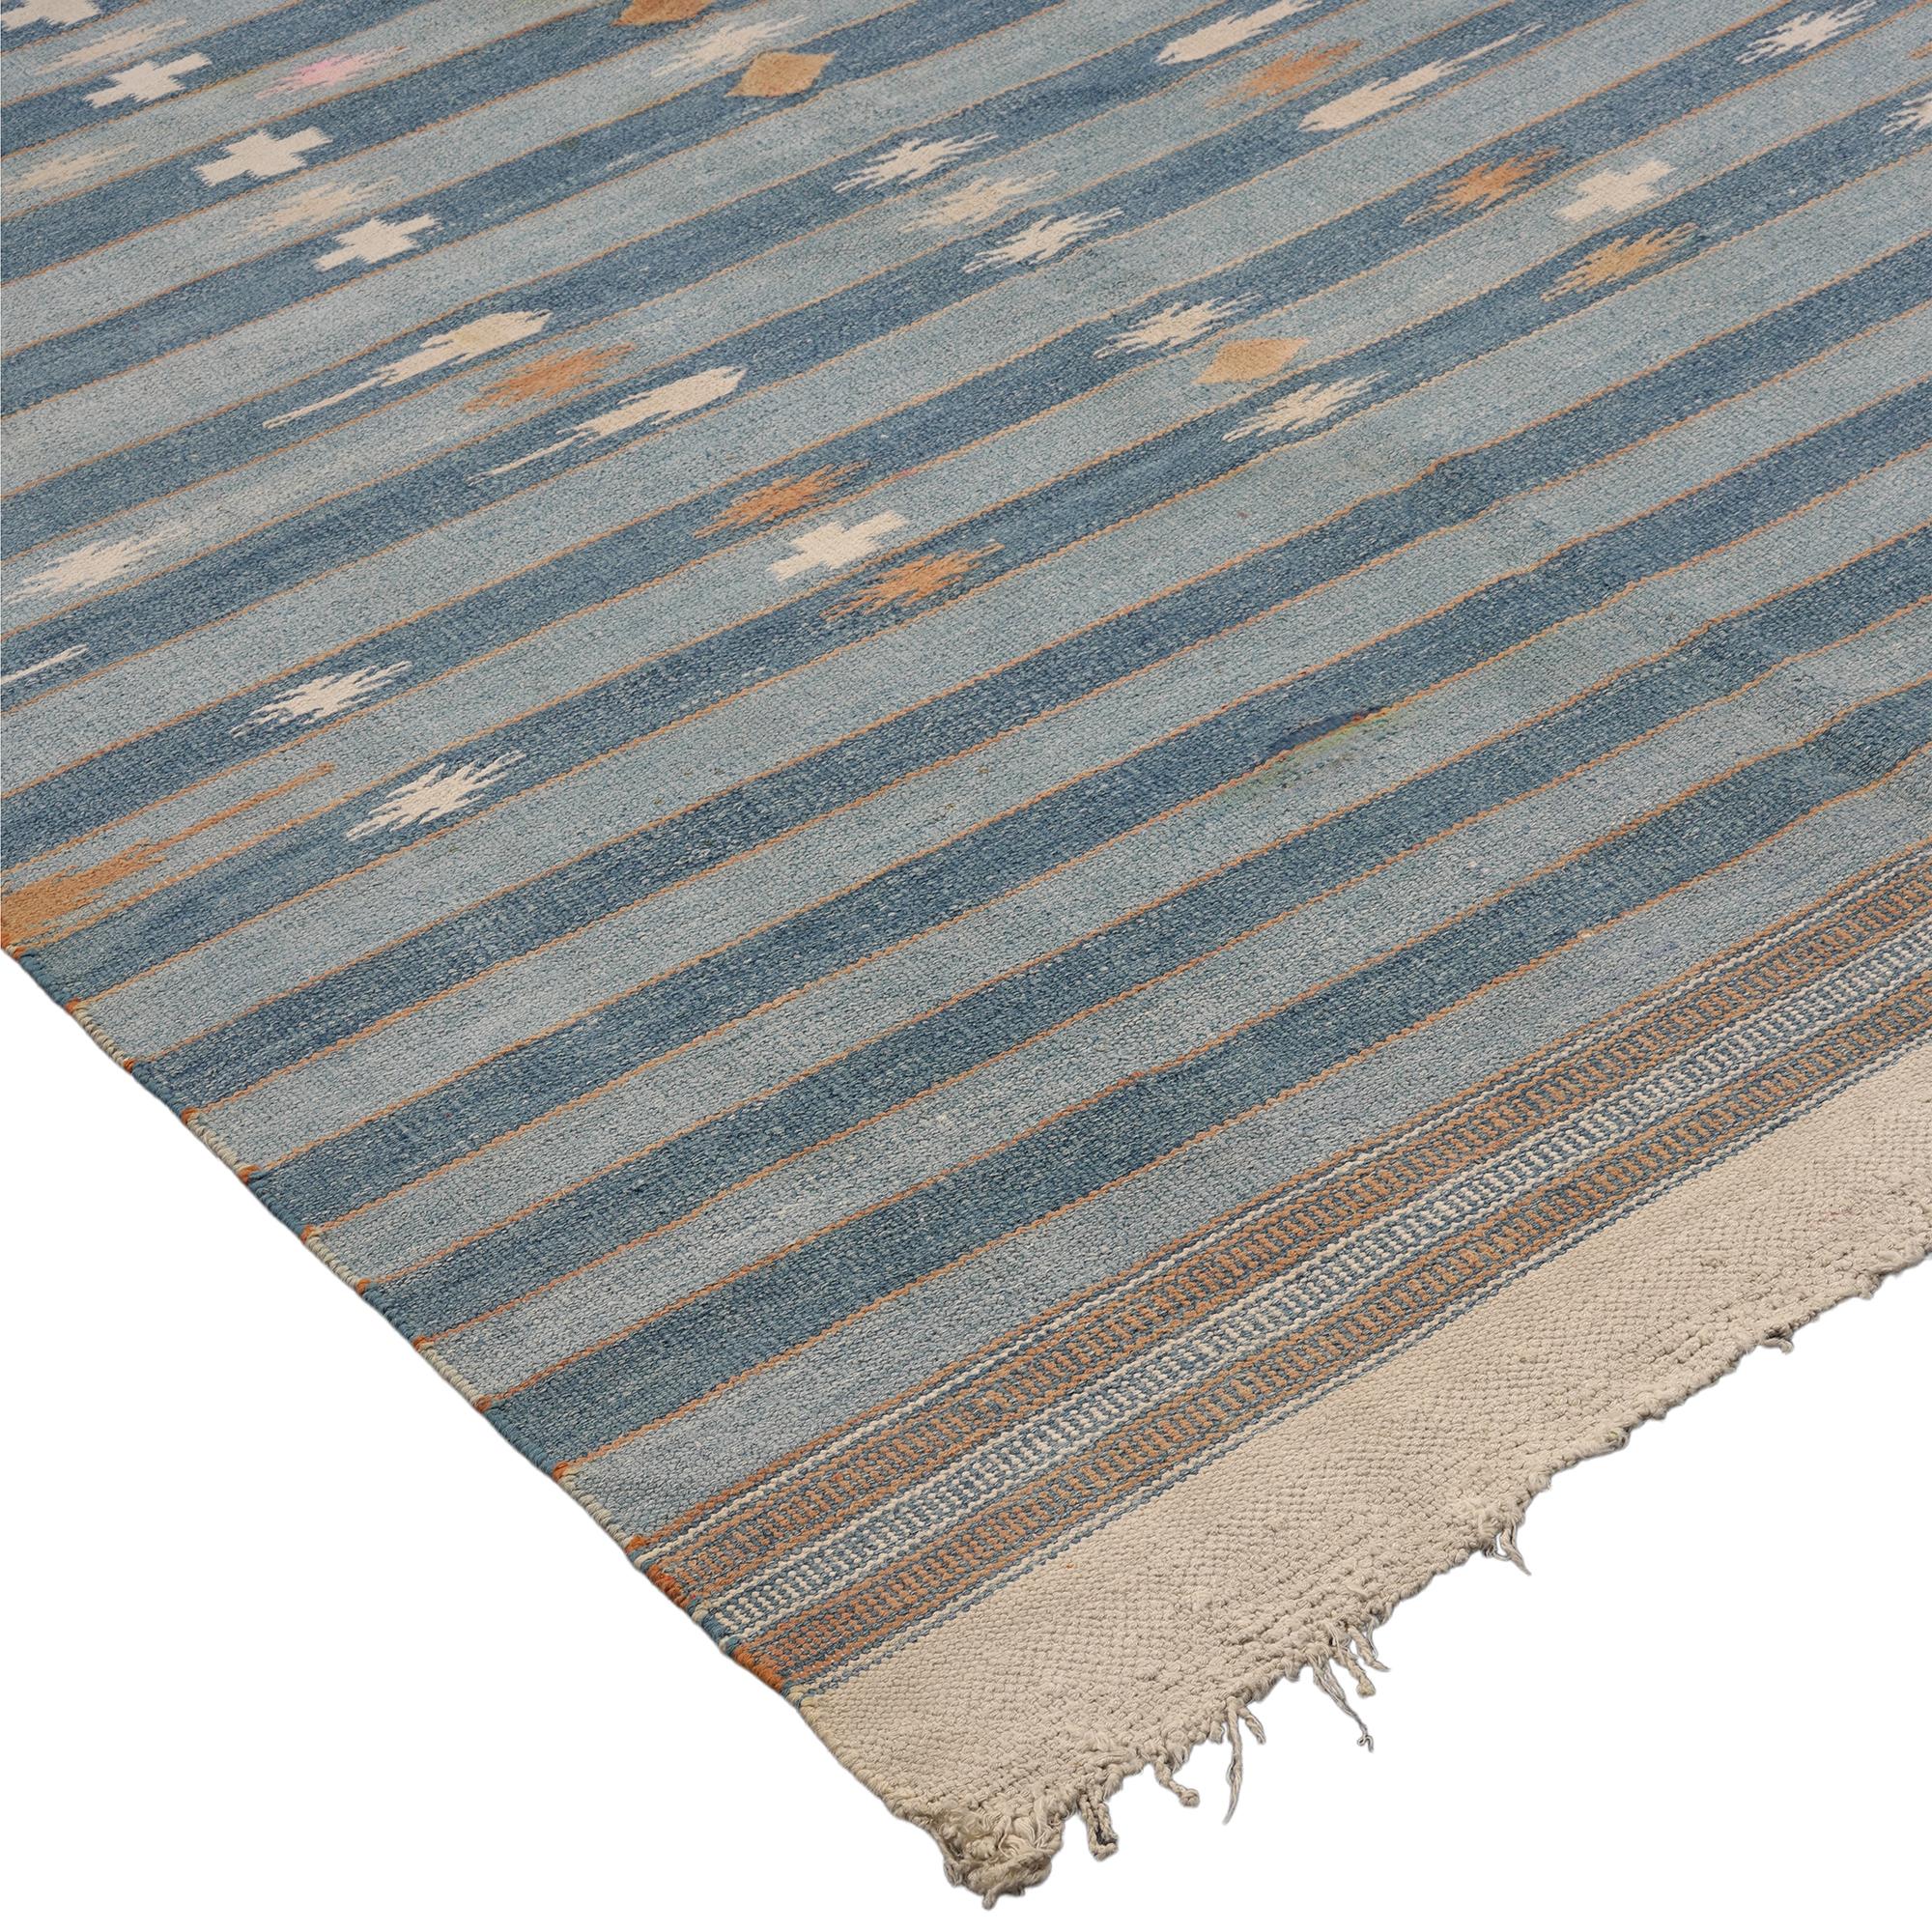 Hand-Woven Vintage Dhurrie Rug with Blue Stripes and Geometric Patterns, from Rug & Kilim For Sale